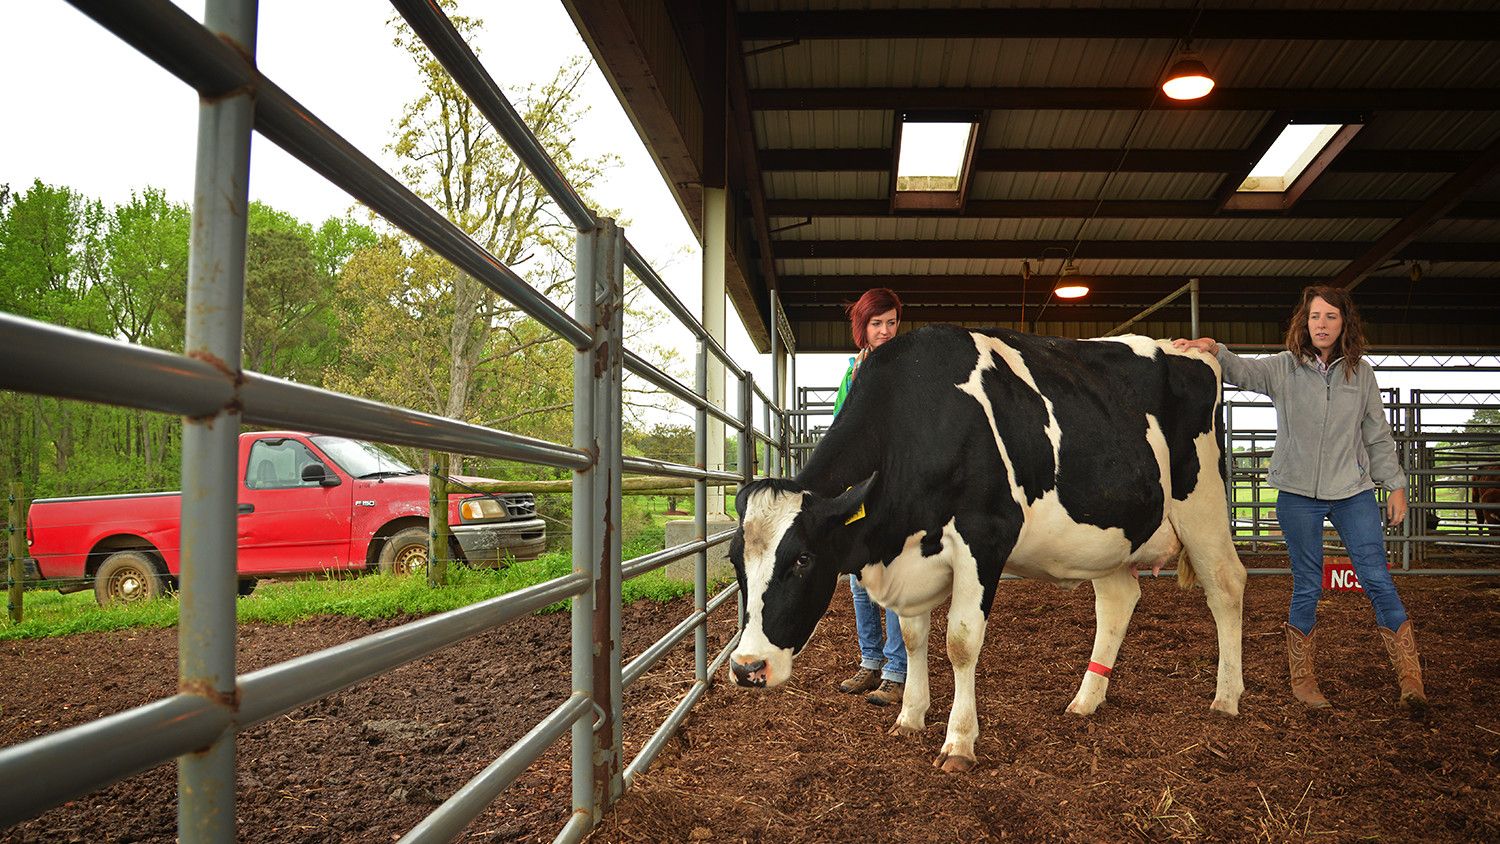 Students tending to a cow in a barn.